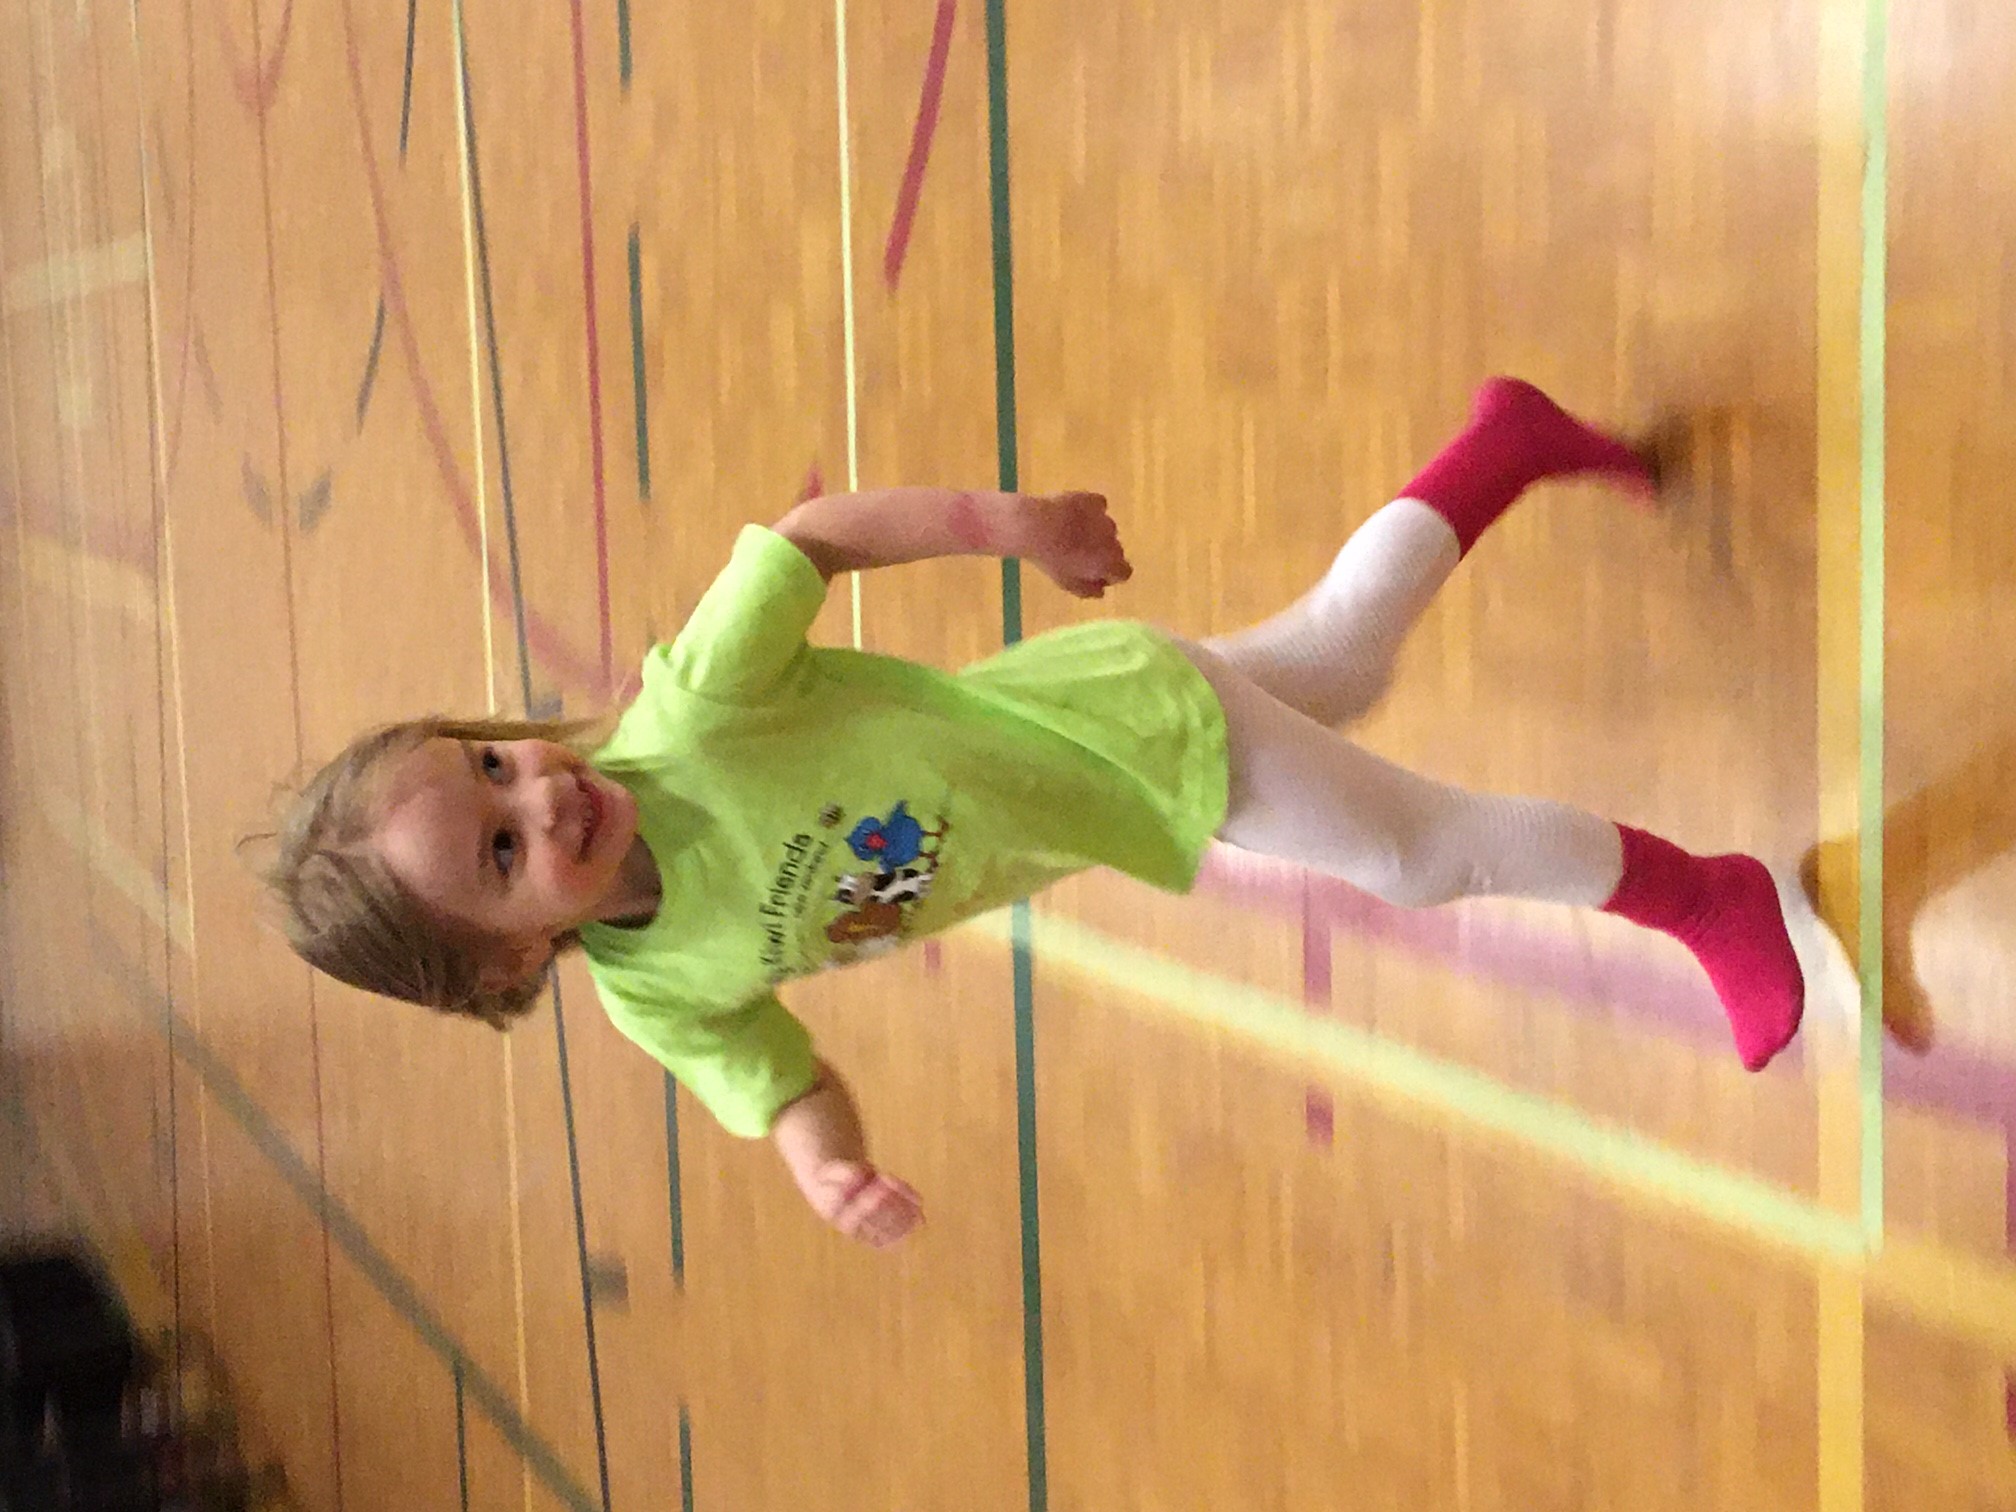 Getting some play time in the school's gym